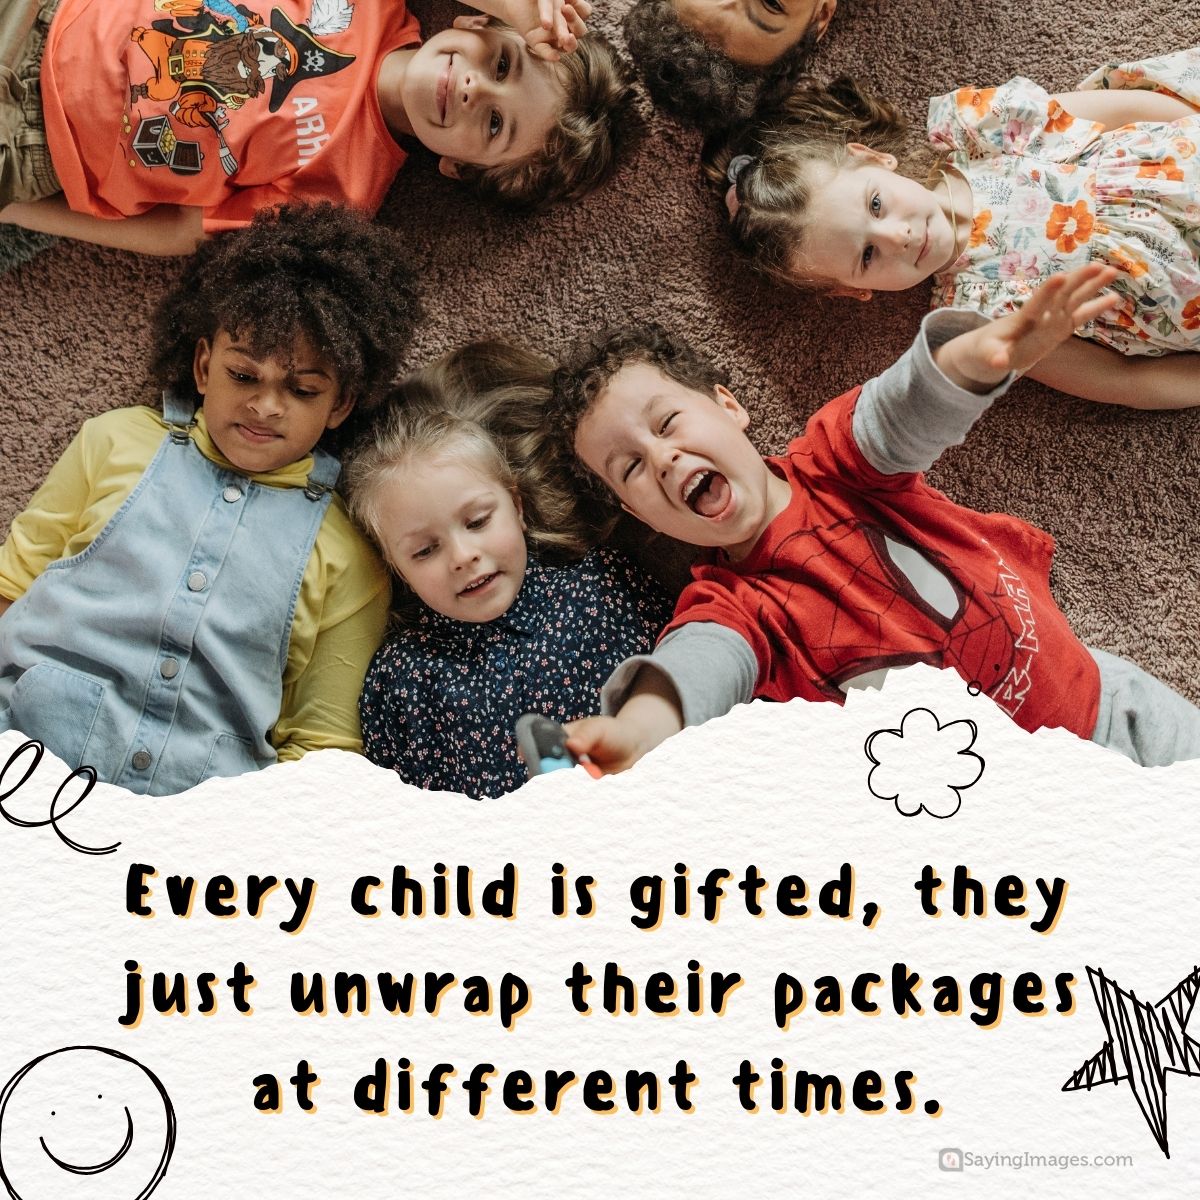 Every child is gifted, they just unwrap their packages at different times.